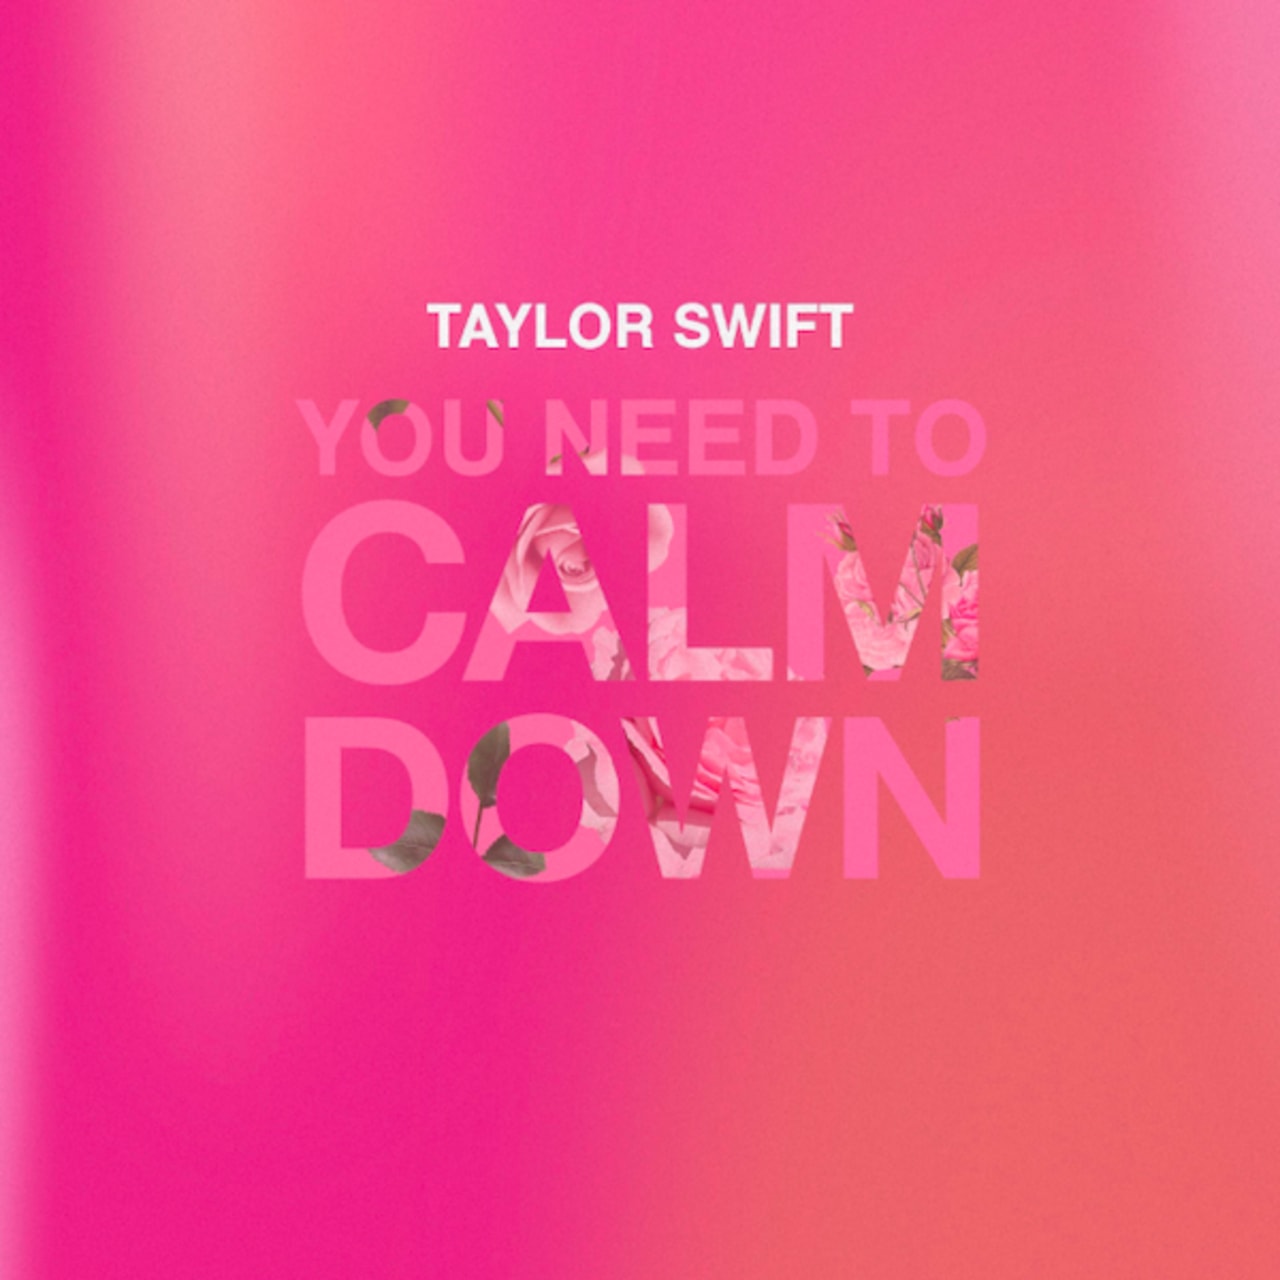 Taylor Swift Shares New Song You Need To Calm Down Off Upcoming Album Lover Complex